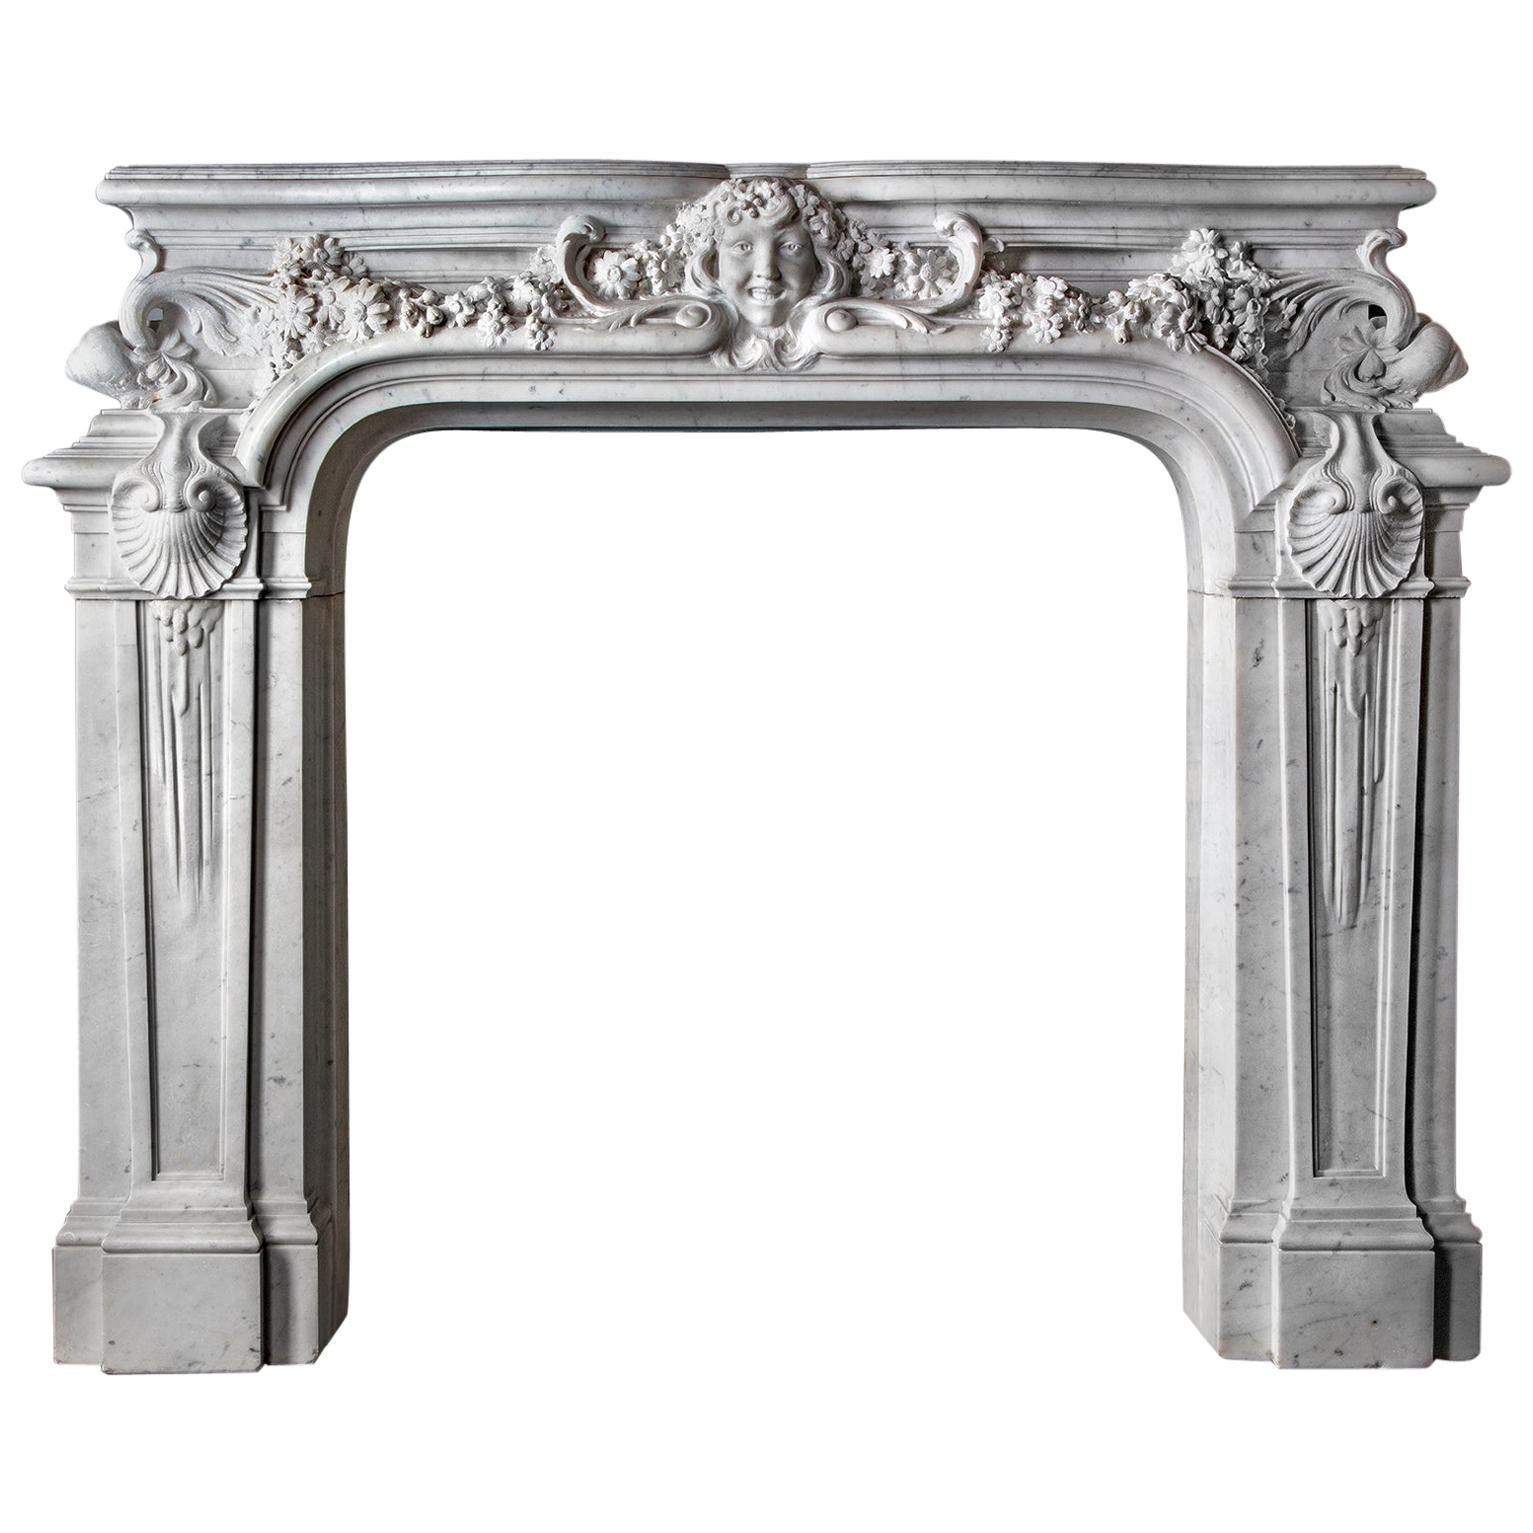 Most Spectacular Antique French Belle Epoque Mantelpiece Statuary Marble